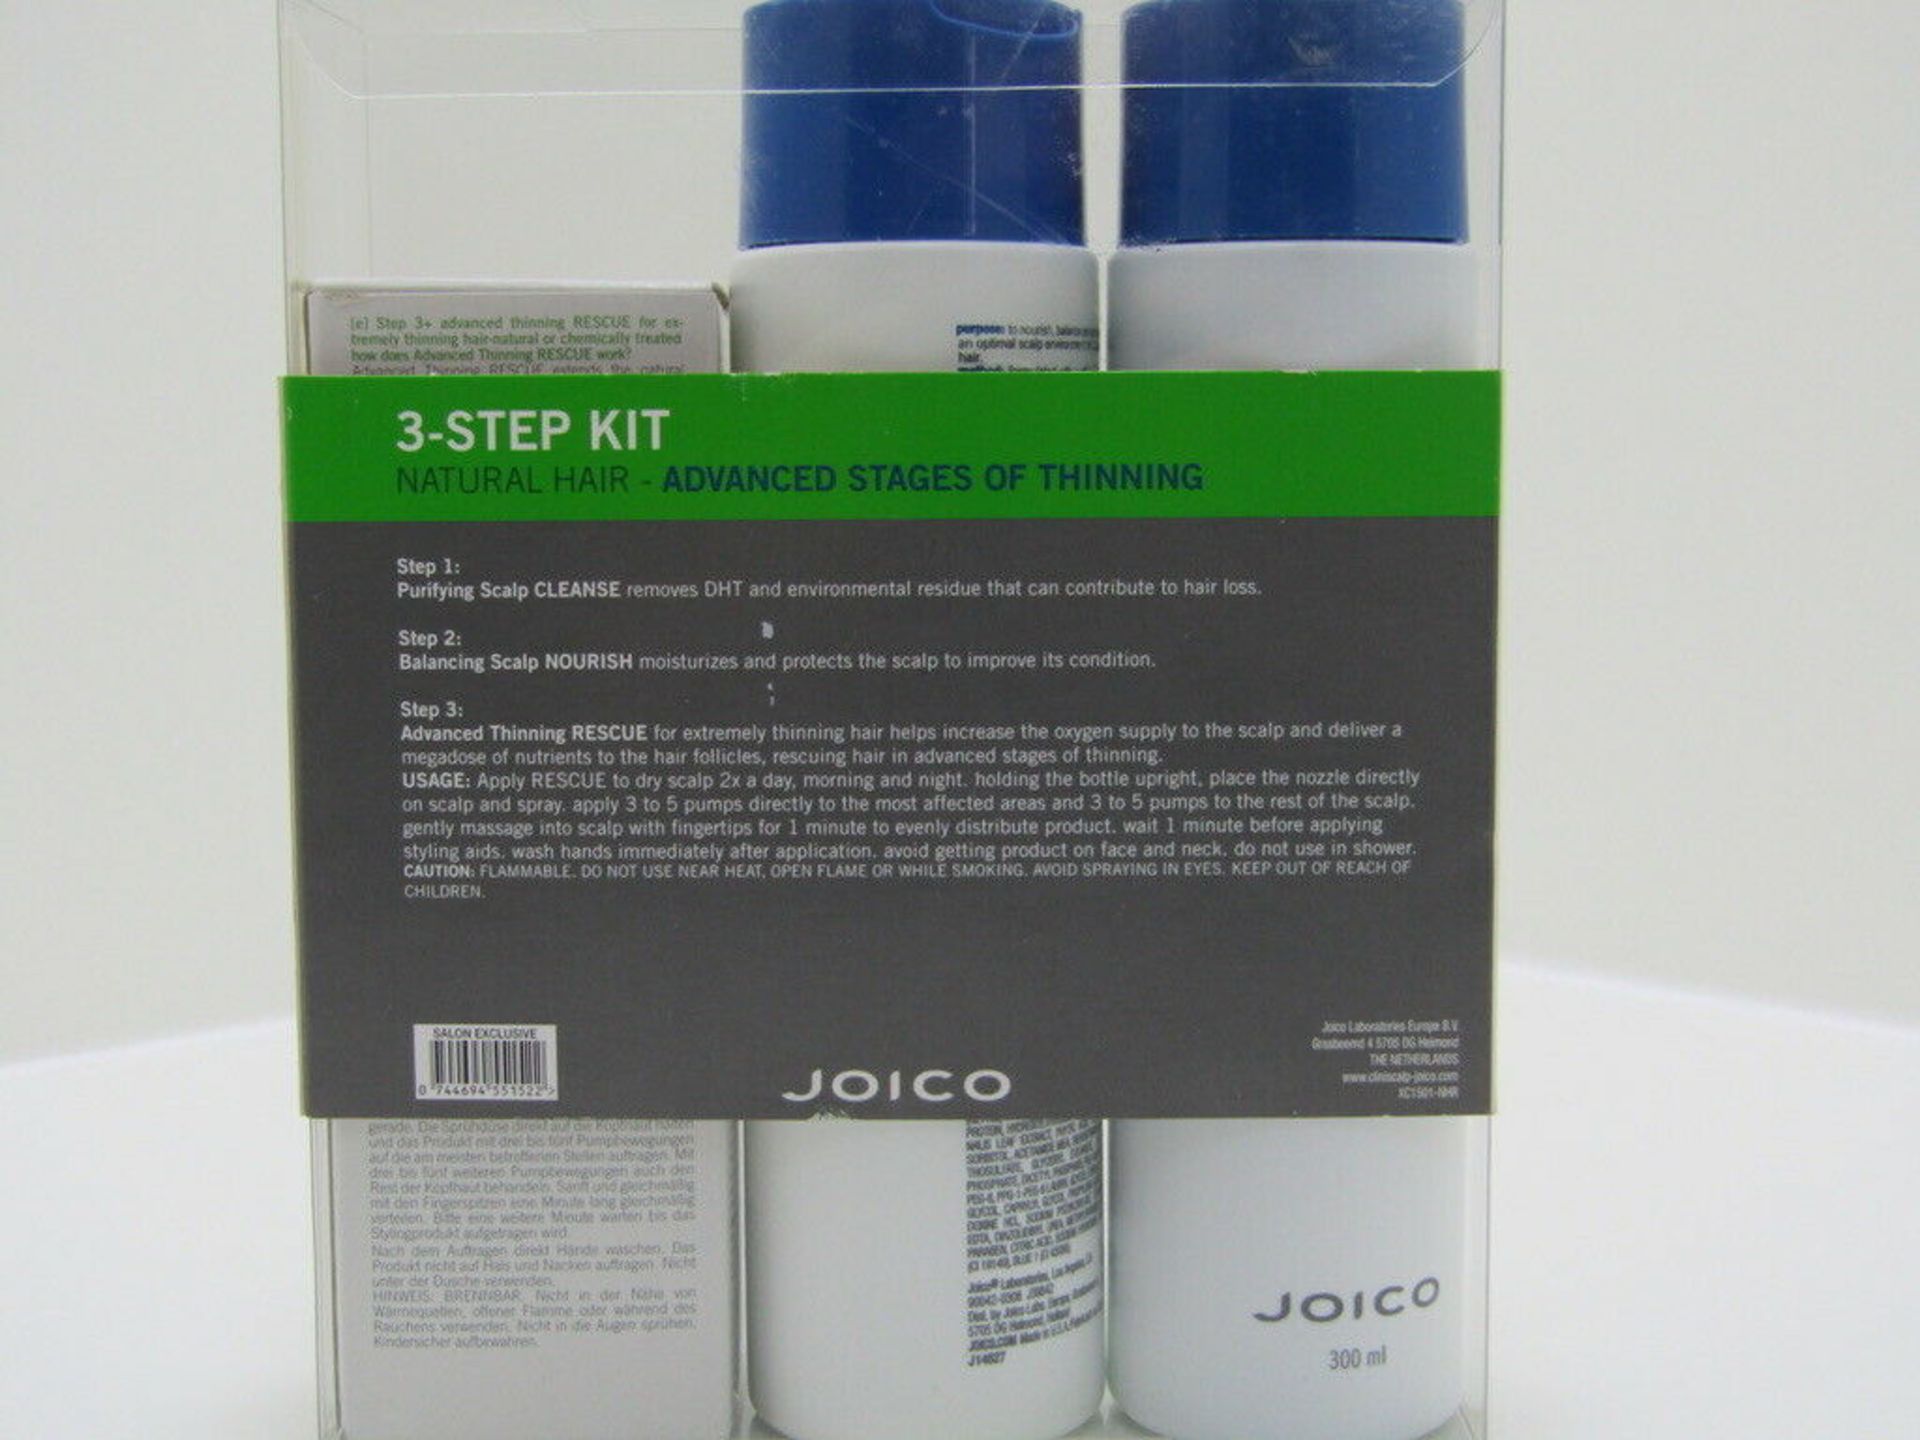 1x Thinning Hair Solution. Cliniscalp 3-Step Kit. Joico Advanced Stage. 700ml - Image 4 of 5